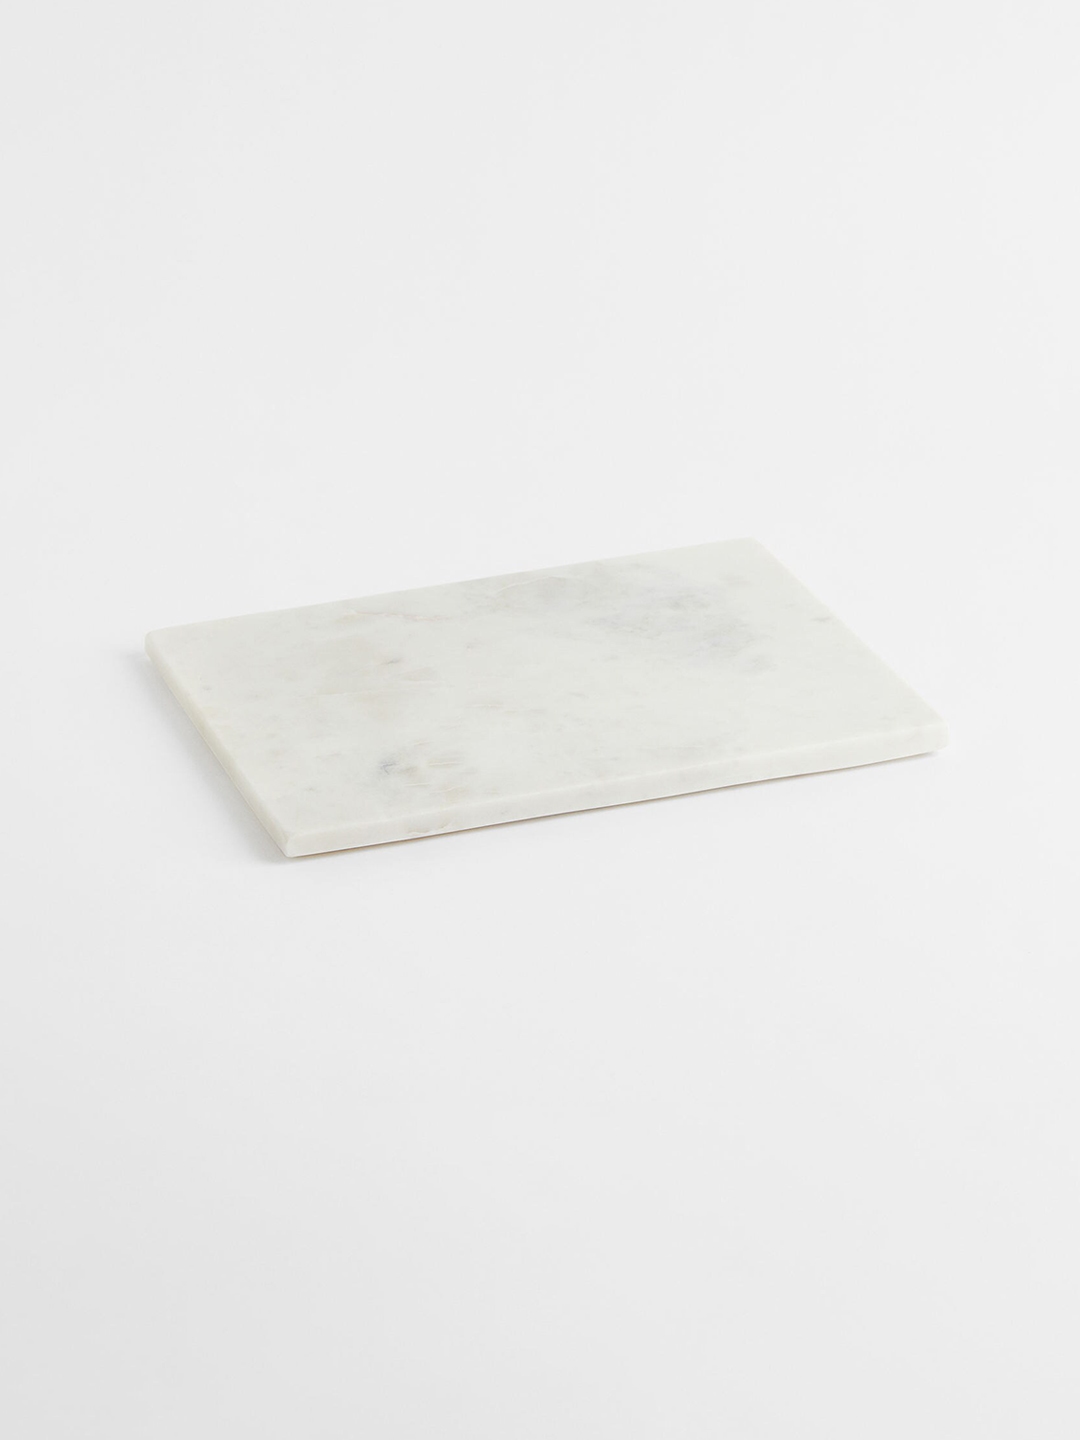 H&M White Marble Serving Tray